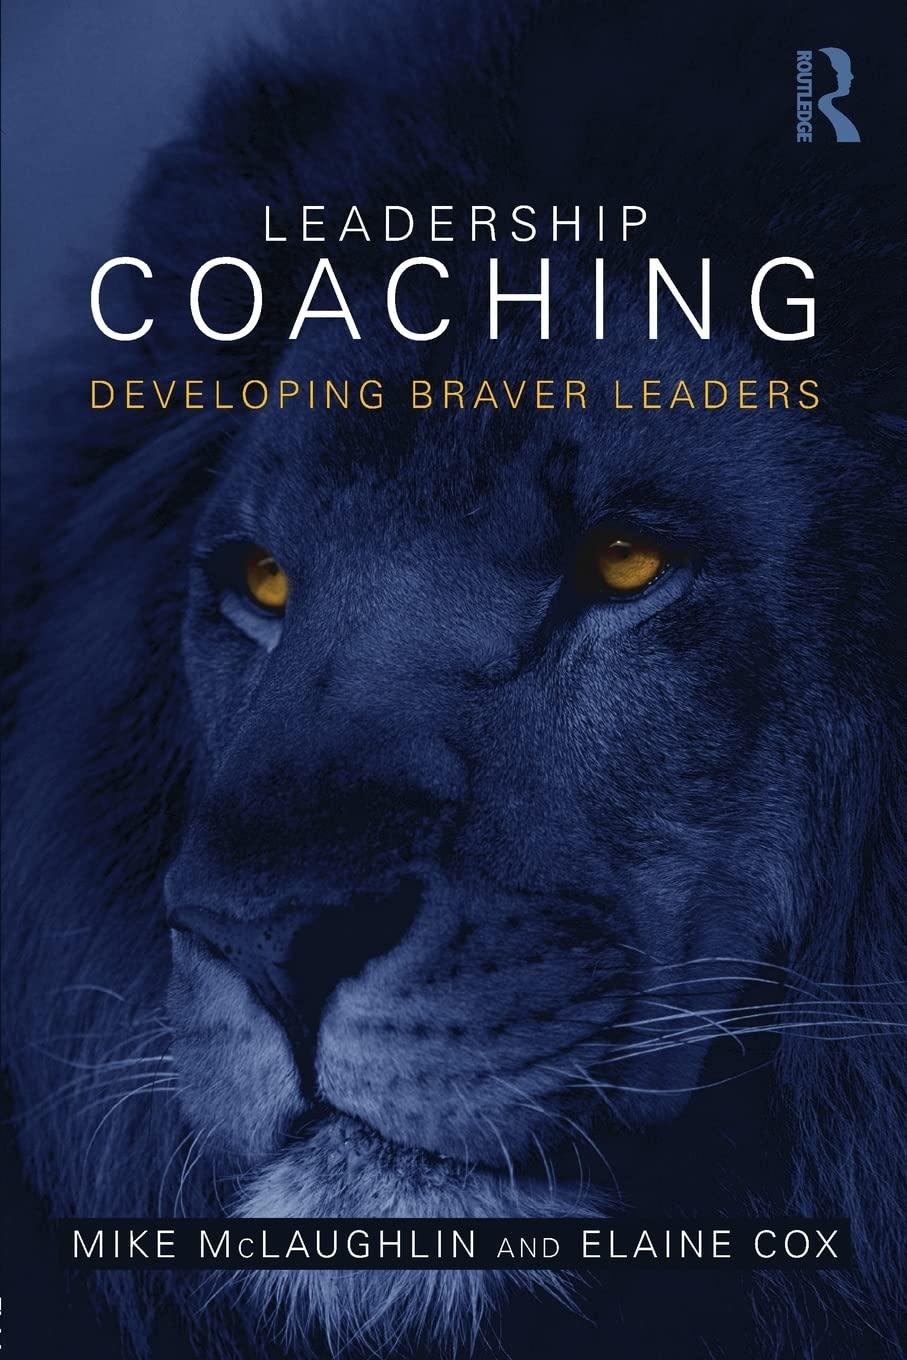 leadership coaching developing braver leaders 1st edition mike mclaughlin, elaine cox 1138786020,